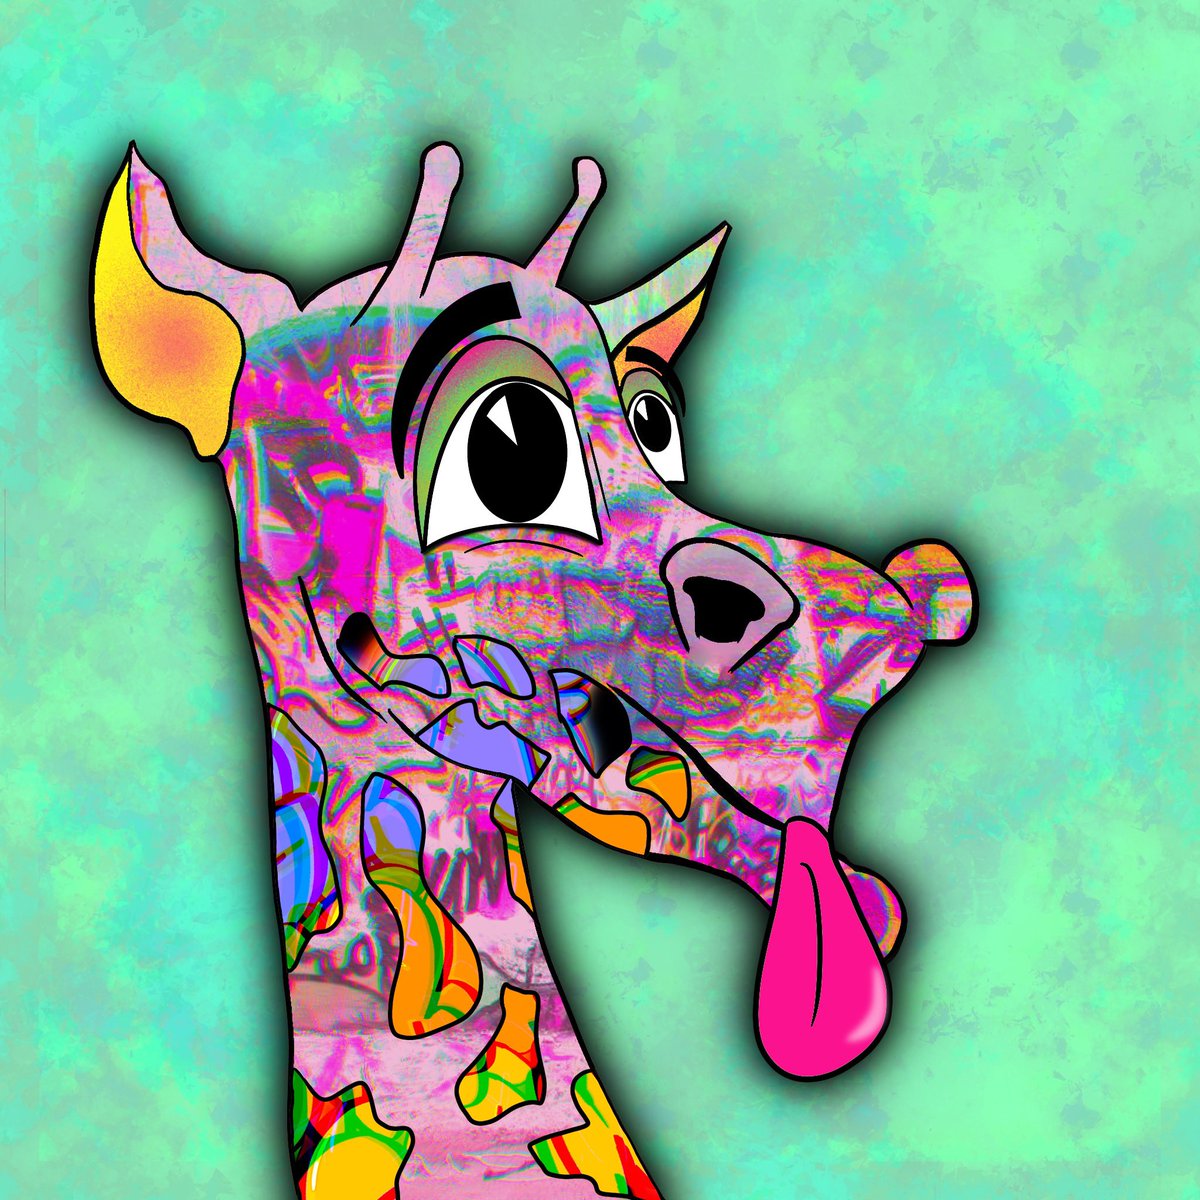 Launched in August 2021, the #GRAFGIRAFFEGANG is a hand drawn project by, and in support of, disabled artists (mental and physical)

Still some remaining joints from drops 1&2 to cop at opensea.io/collection/gra…

We’d love YOUR support!

PLS RT 🙏

#NFTCommunity #nftdrop #charity